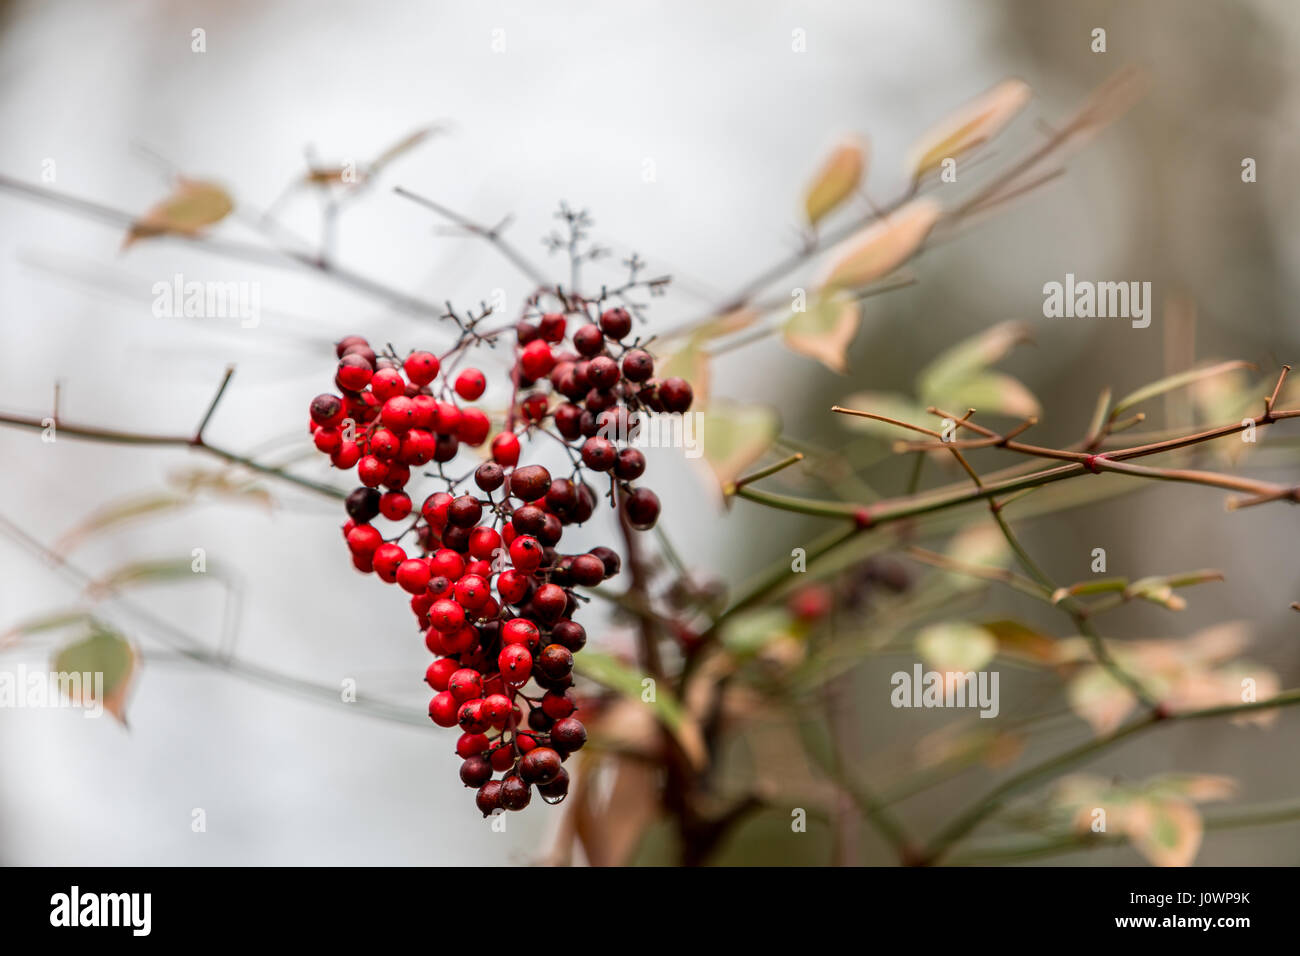 detail of red wild berries on a branch Stock Photo